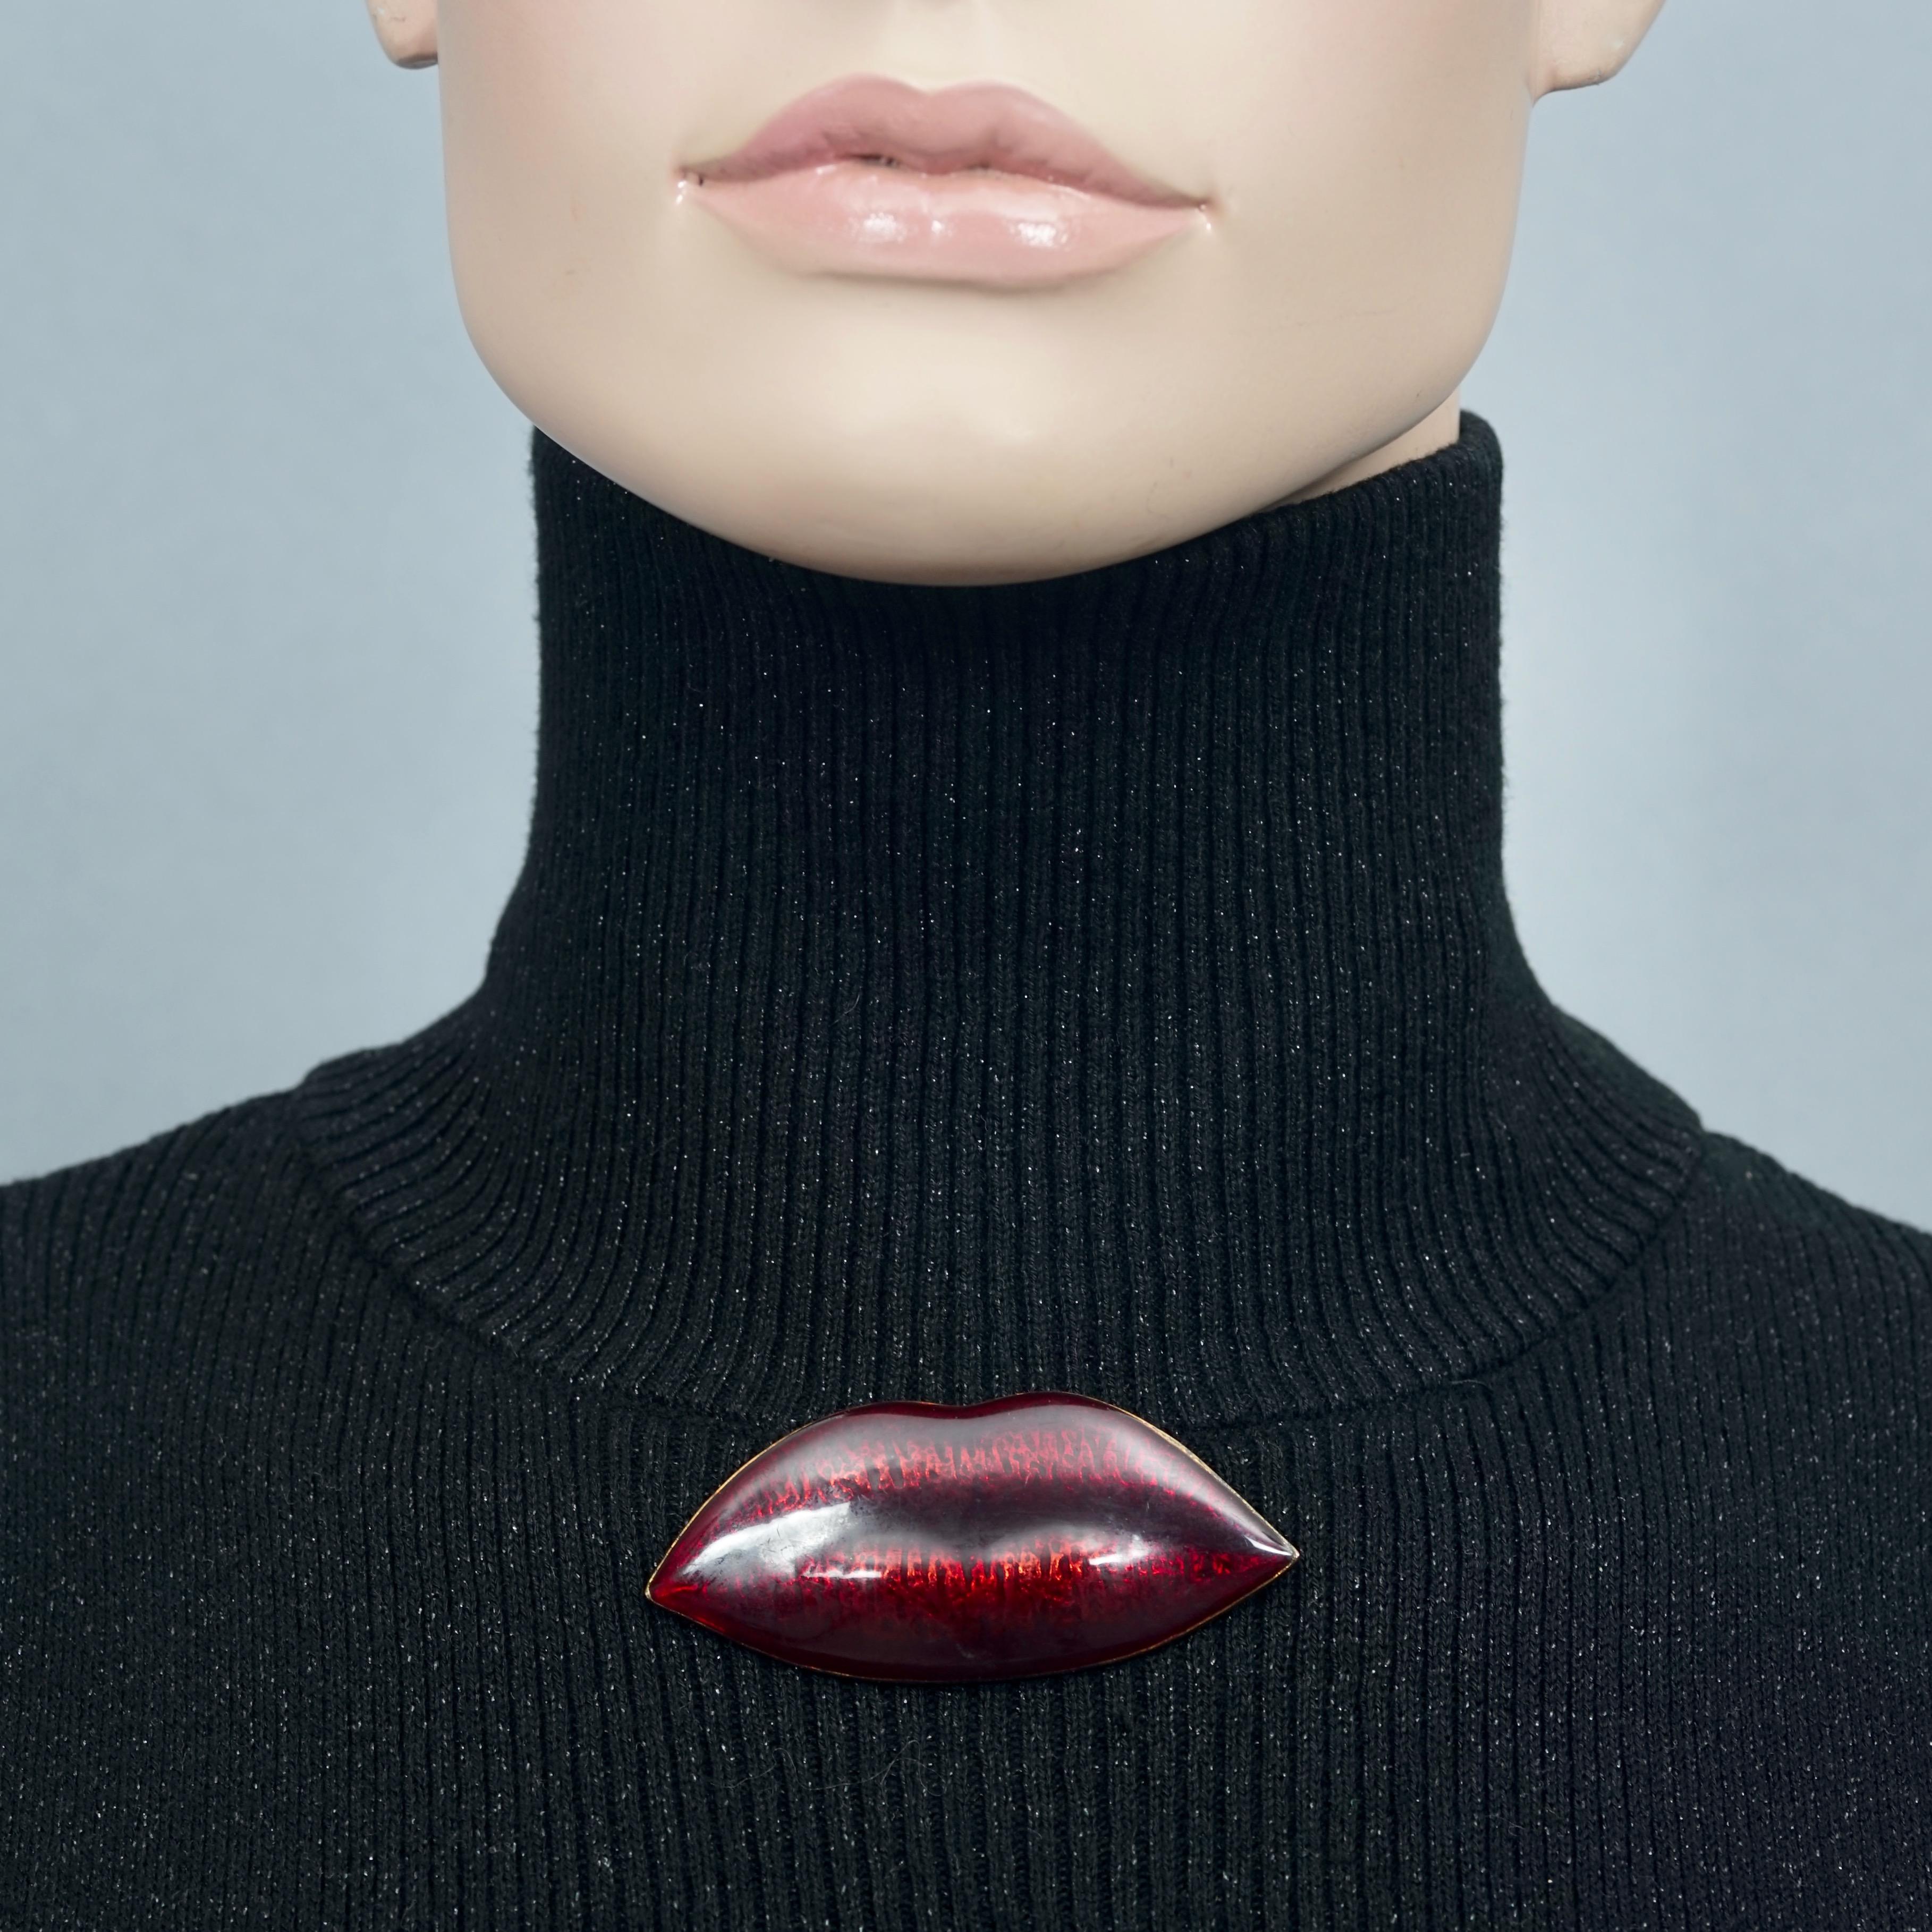 SONIA RYKIEL “Kiss Me” Sultry Red Lips Brooch

Measurements:
Height: 1.26 inches (3.2 cm)
Width: 2.80 inches (7.1 cm)

Features:
- 100% Authentic SONIA RYKIEL.
- Enamel sultry red lips brooch.
- Bronze tone hardware.
- Signed SR.
